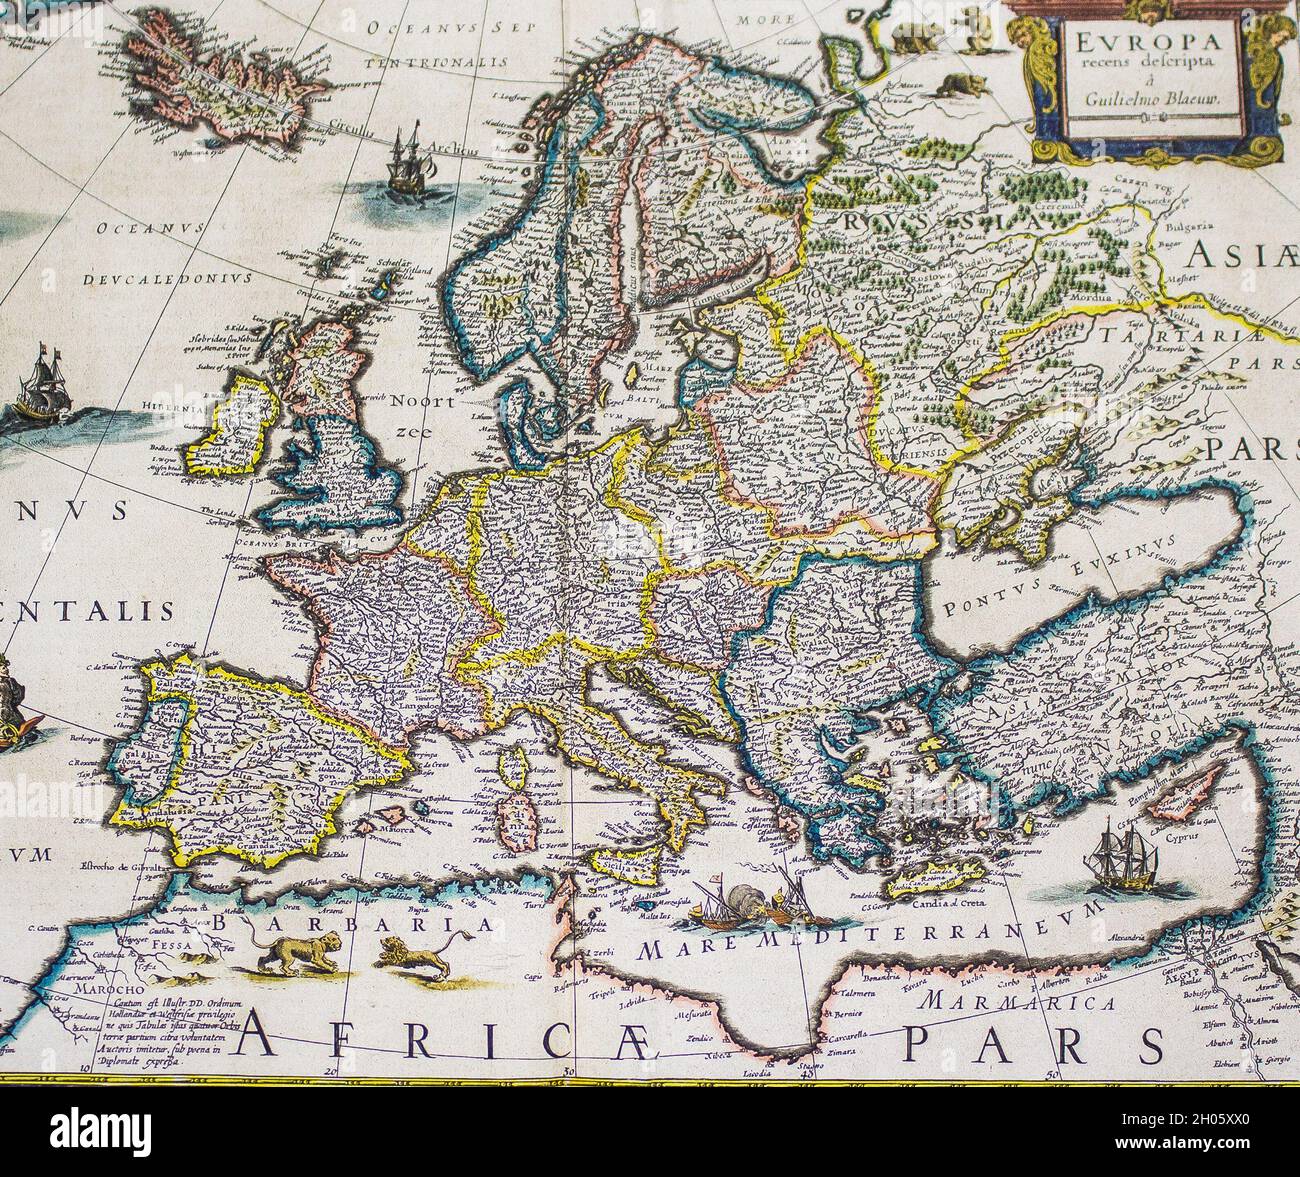 Ukraine, Kyiv - May 11, 2019: Old map of Europe. Retro cartography. Traveling in the old days. Maps of countries, continents and seas Stock Photo